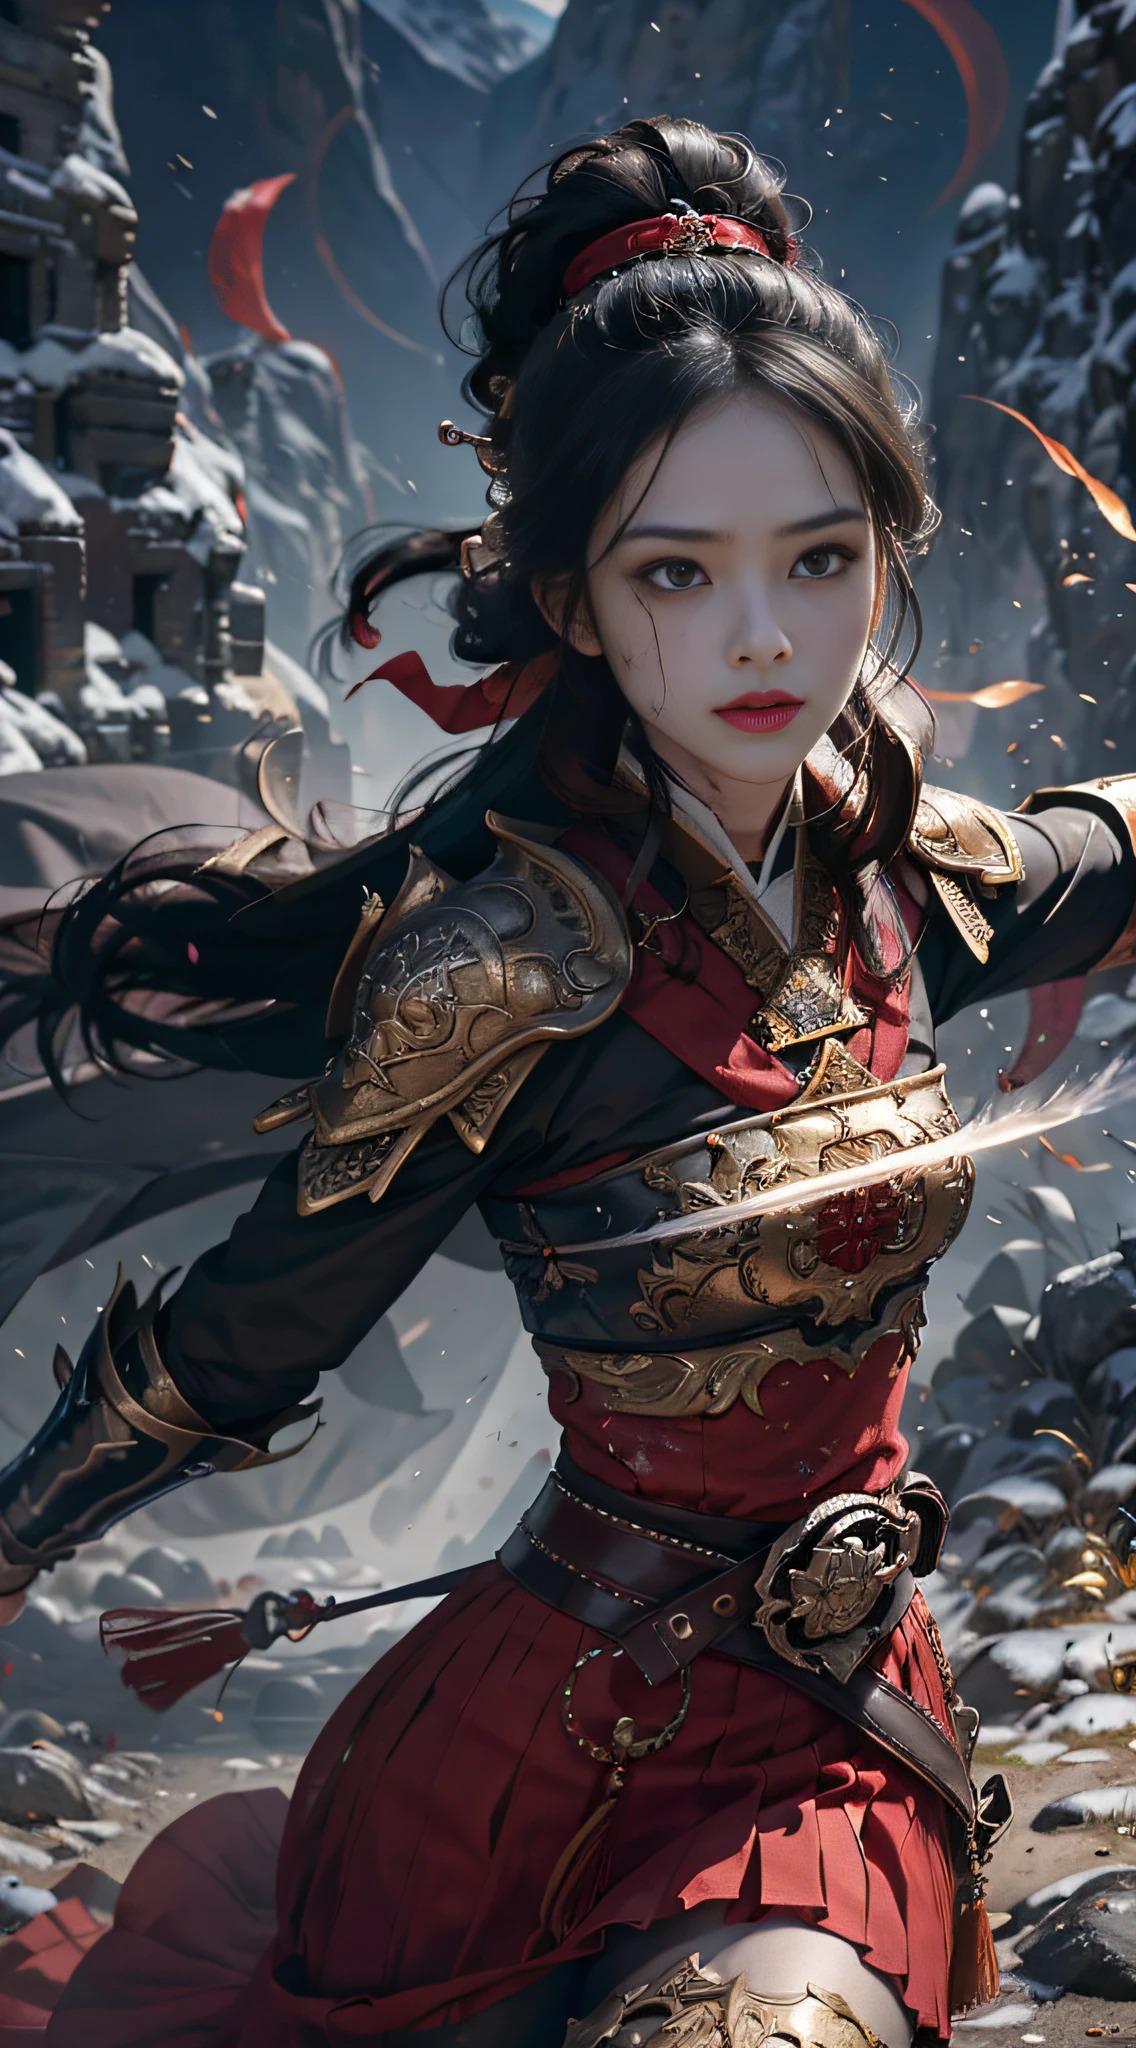 (Positive Focus), (In the Dark: 1), (Best Quality), Movie Poster, Highly Detailed, 8k Wallpaper, Volume Lighting, Dynamic Lighting, A Girl, Long Black Hair, Ponytail, Black Metal Armor, Red Belt, Black Armor, Shoulder Armor, Waist Guard, Hand Guard, Veil, Holding a Long Sword in front of Body, Ancient Chinese Style, Battle Stance, Lots of Blood, Blood Stains on Face, Clothes Damaged, Ancient Chinese Battlefield, Ancient Chinese Soldiers, Arrows Flying, War, Night, Dramatic Composition, Sword qi surrounding, rich picture detail, war, movie lighting,